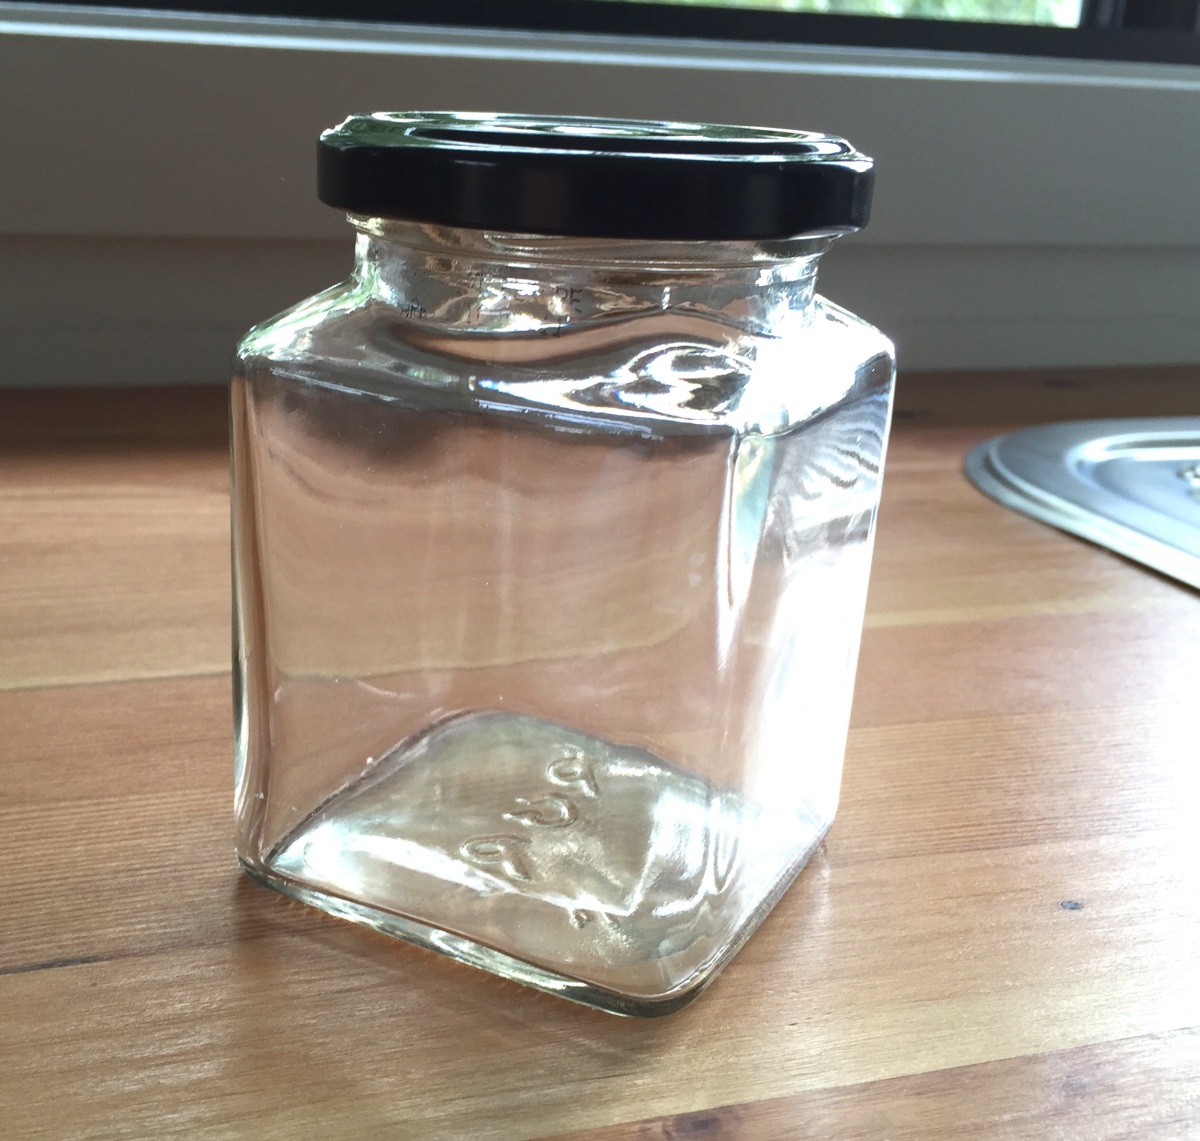 How to remove stubborn labels from jars